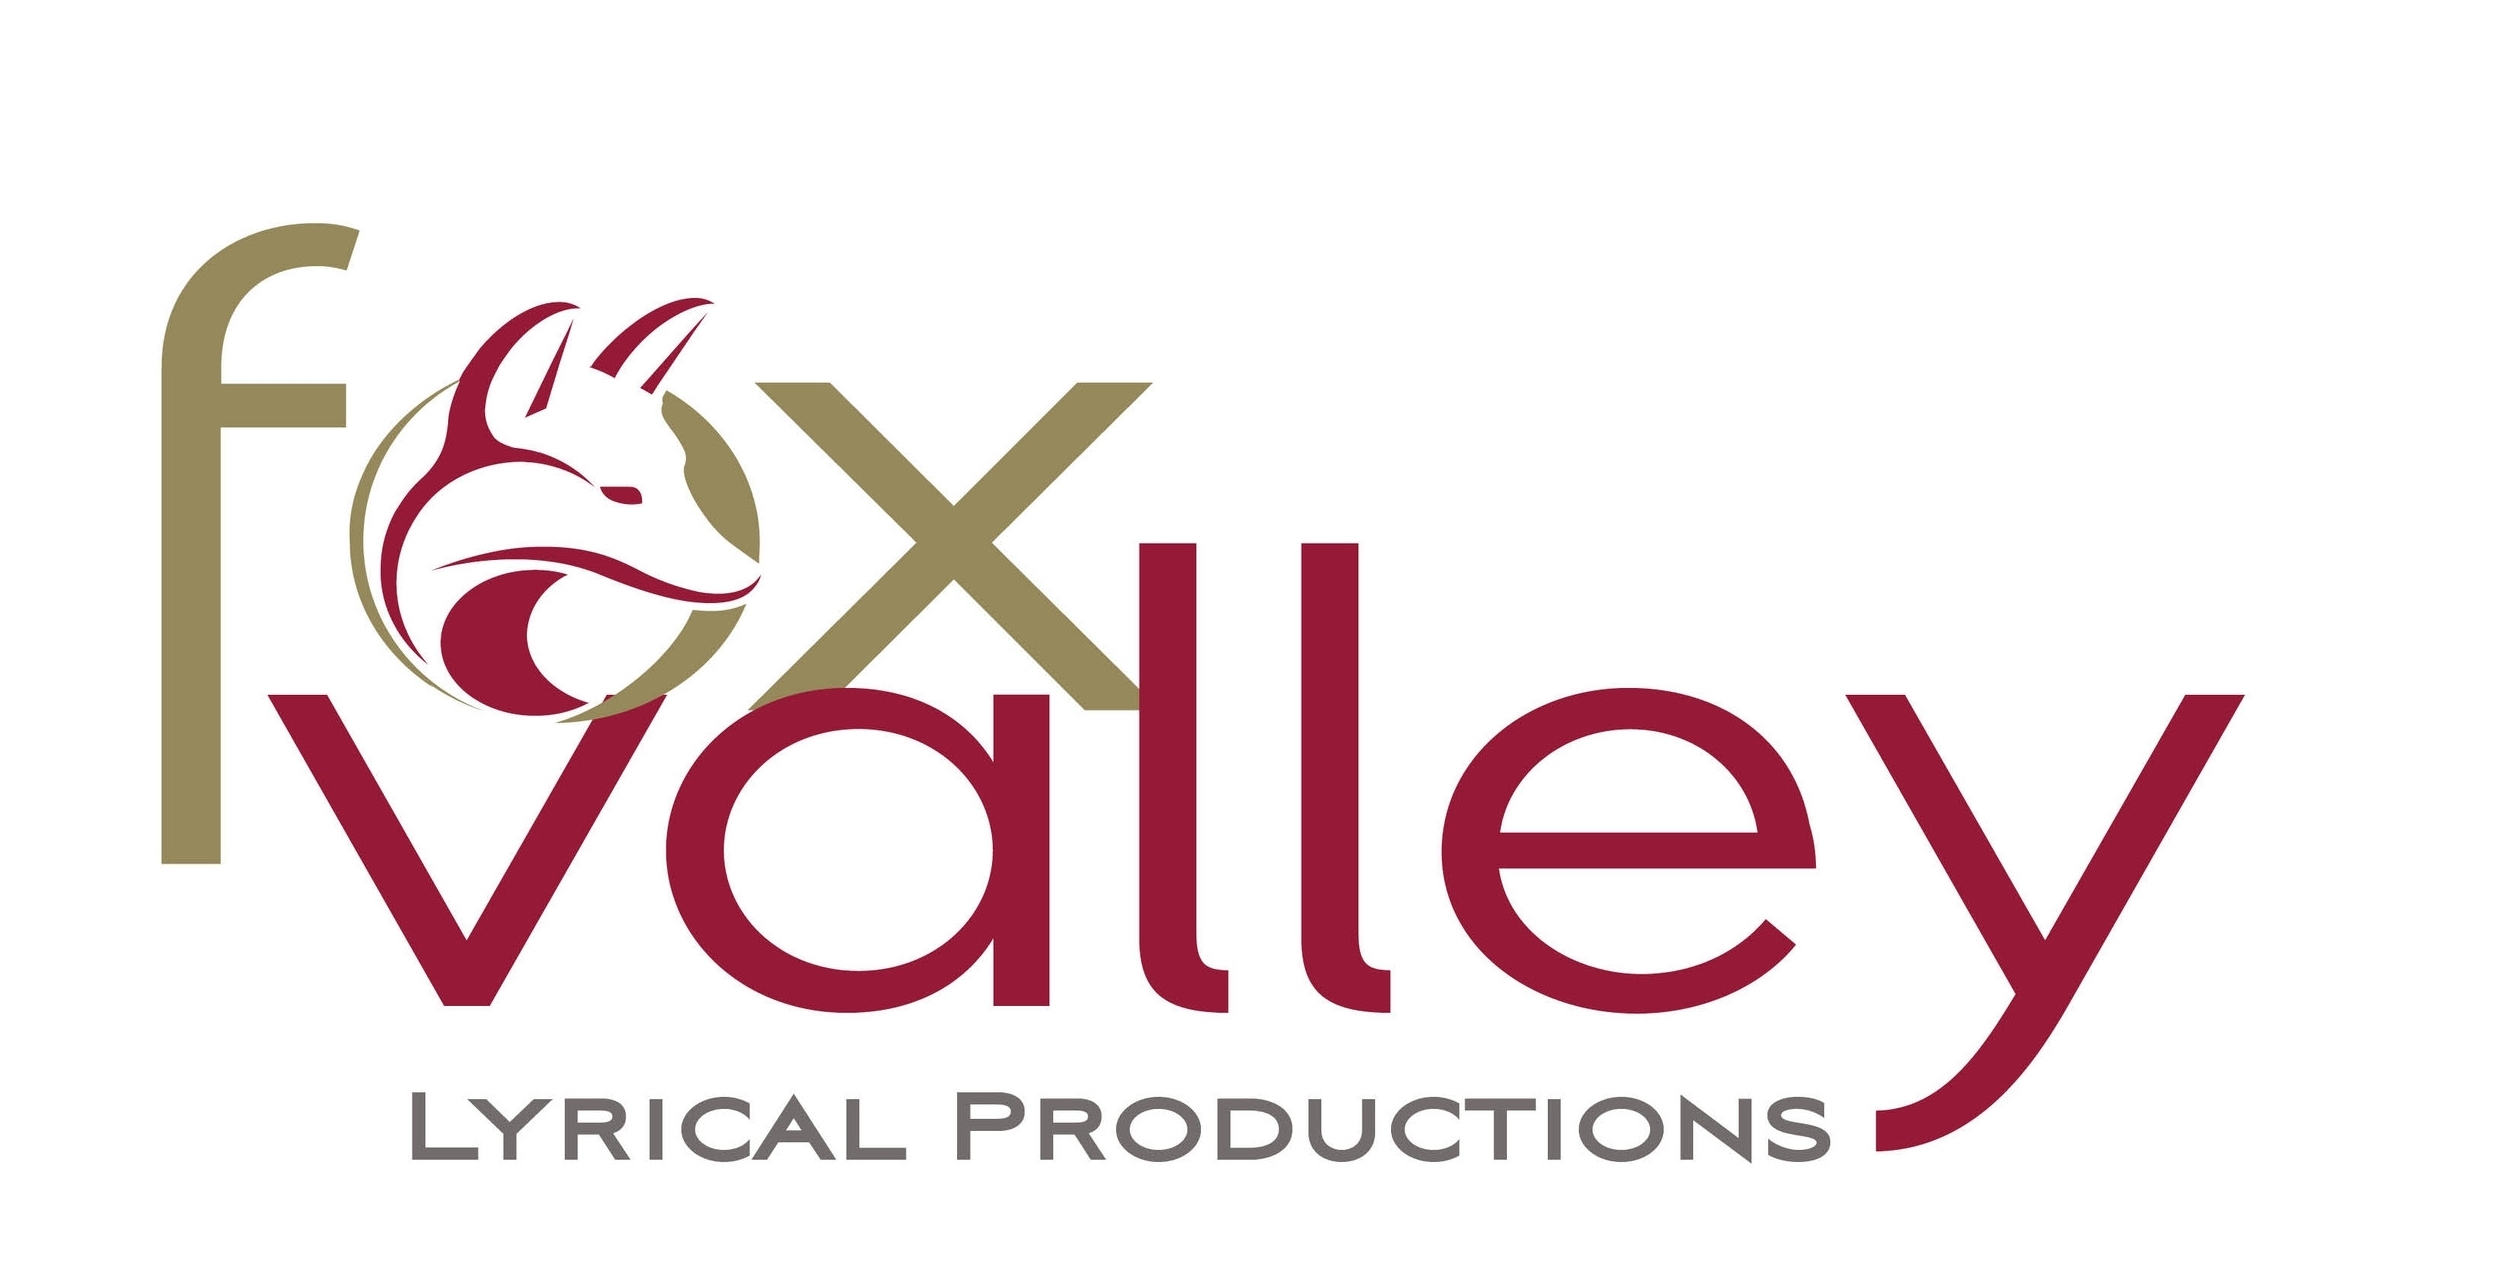 Fox Valley Lyrical Productions